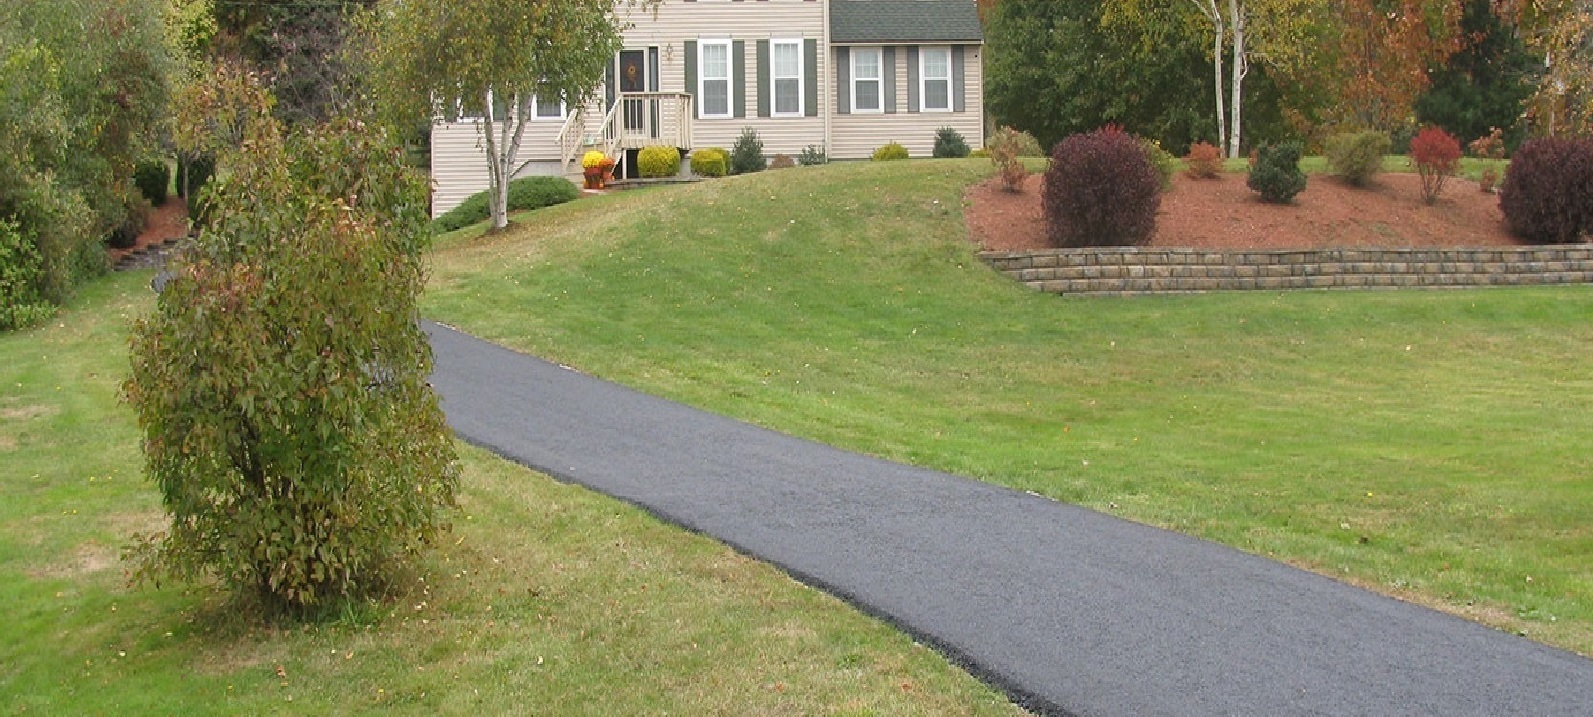 driveway paving in nh and mass